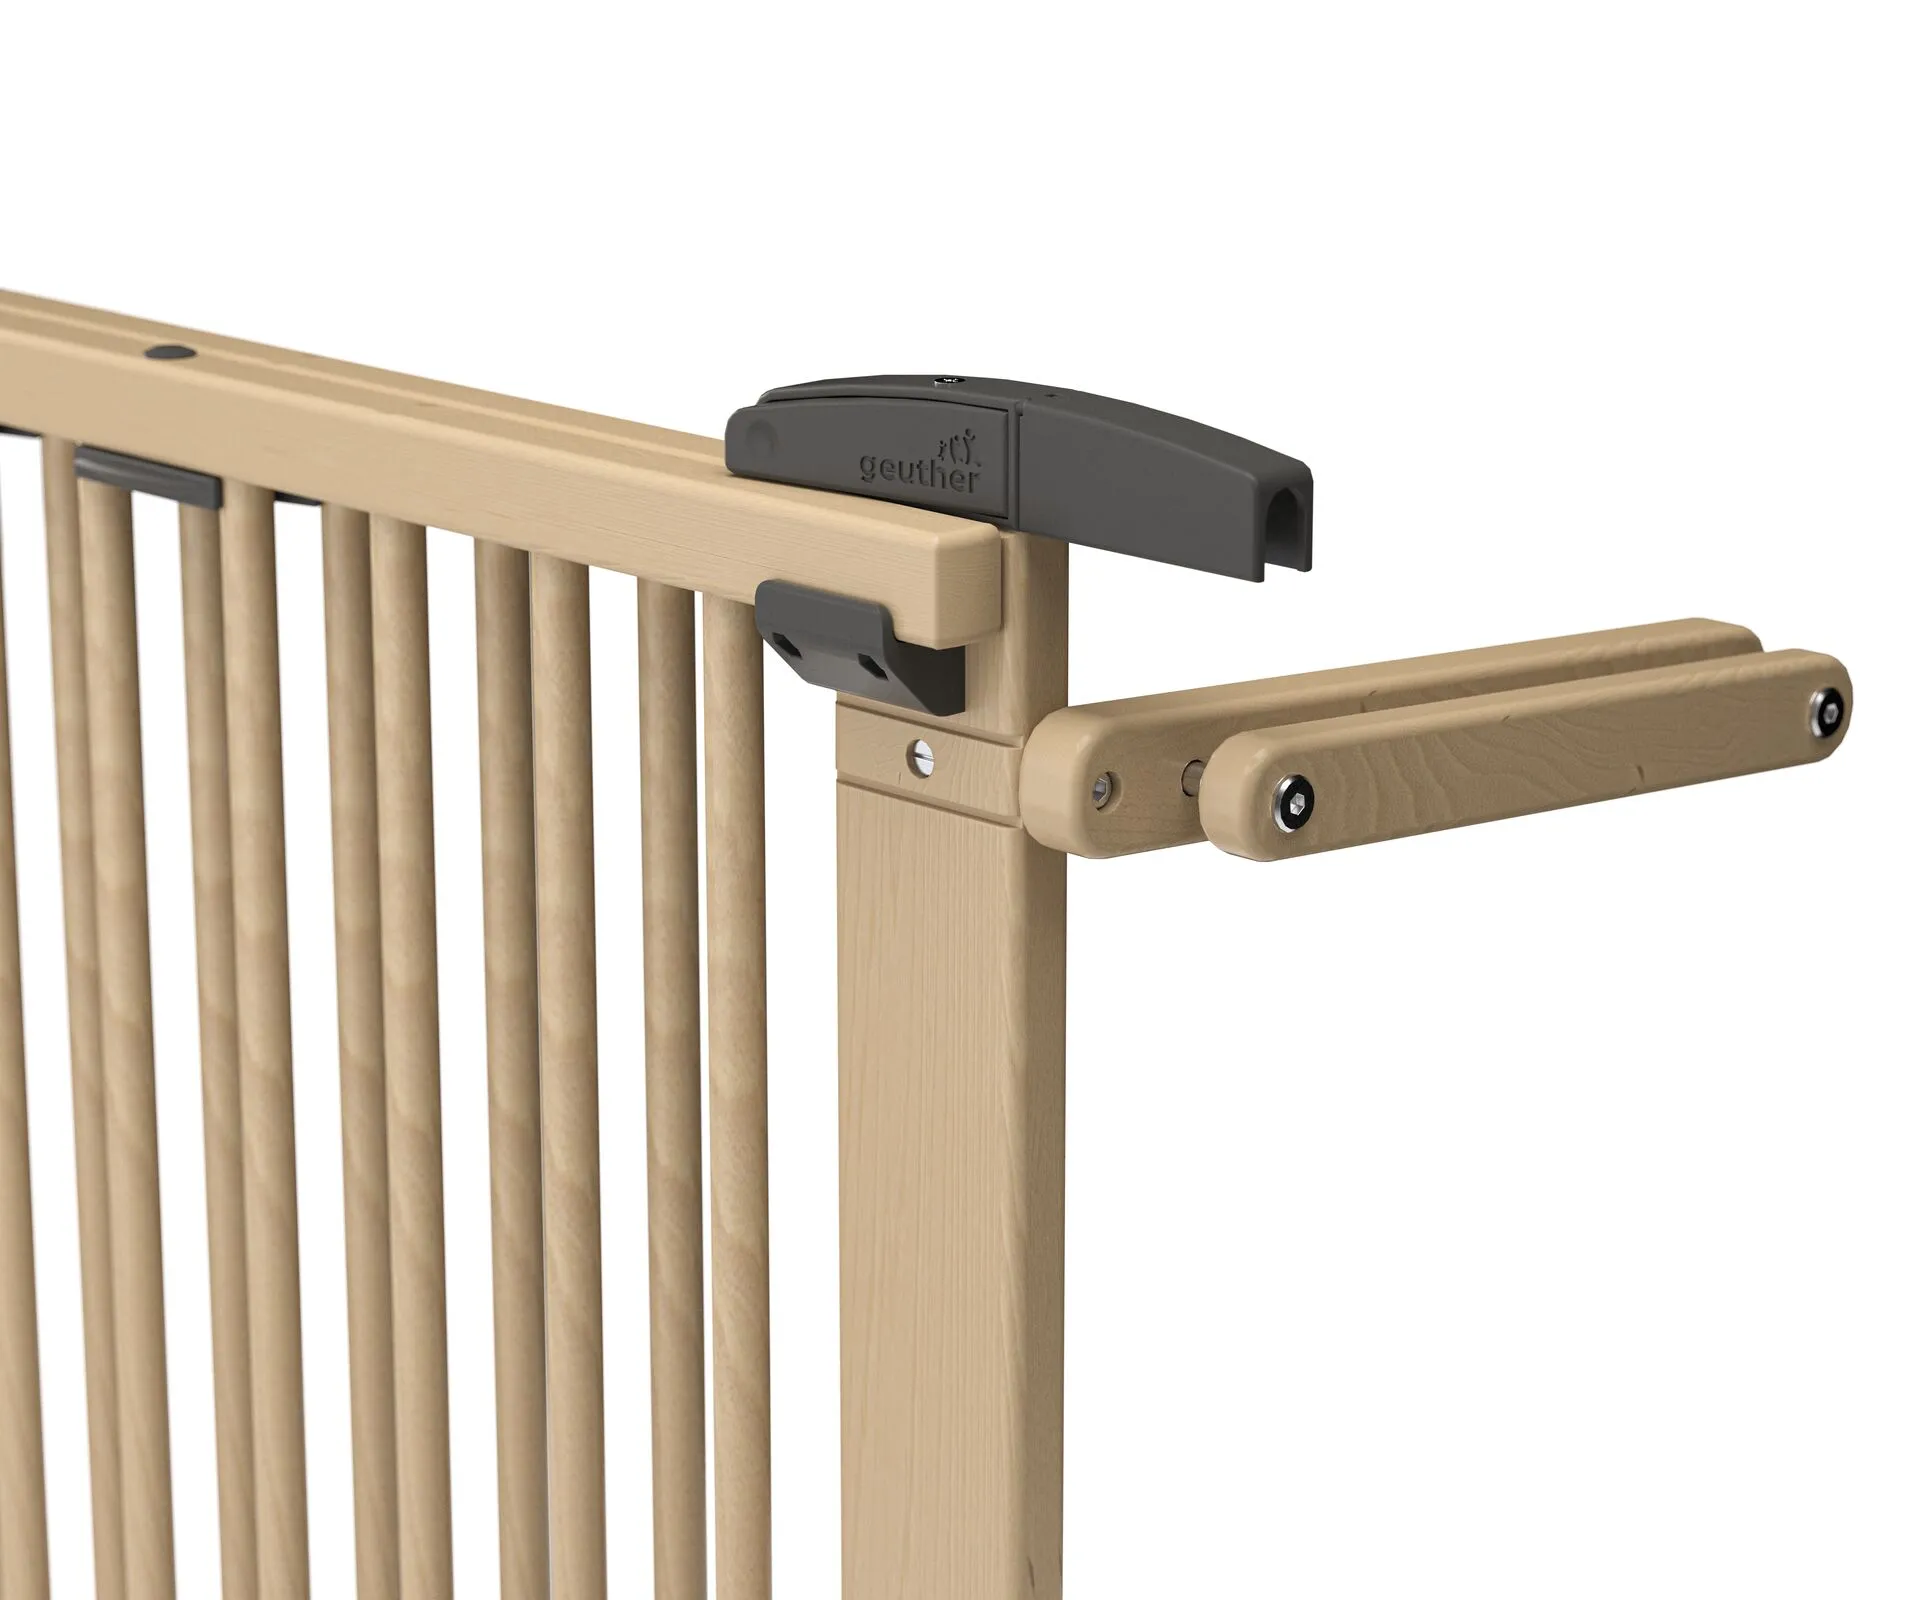 Round bar Stair Safety Gate 2733/2735 for openings 67-135cm in wood